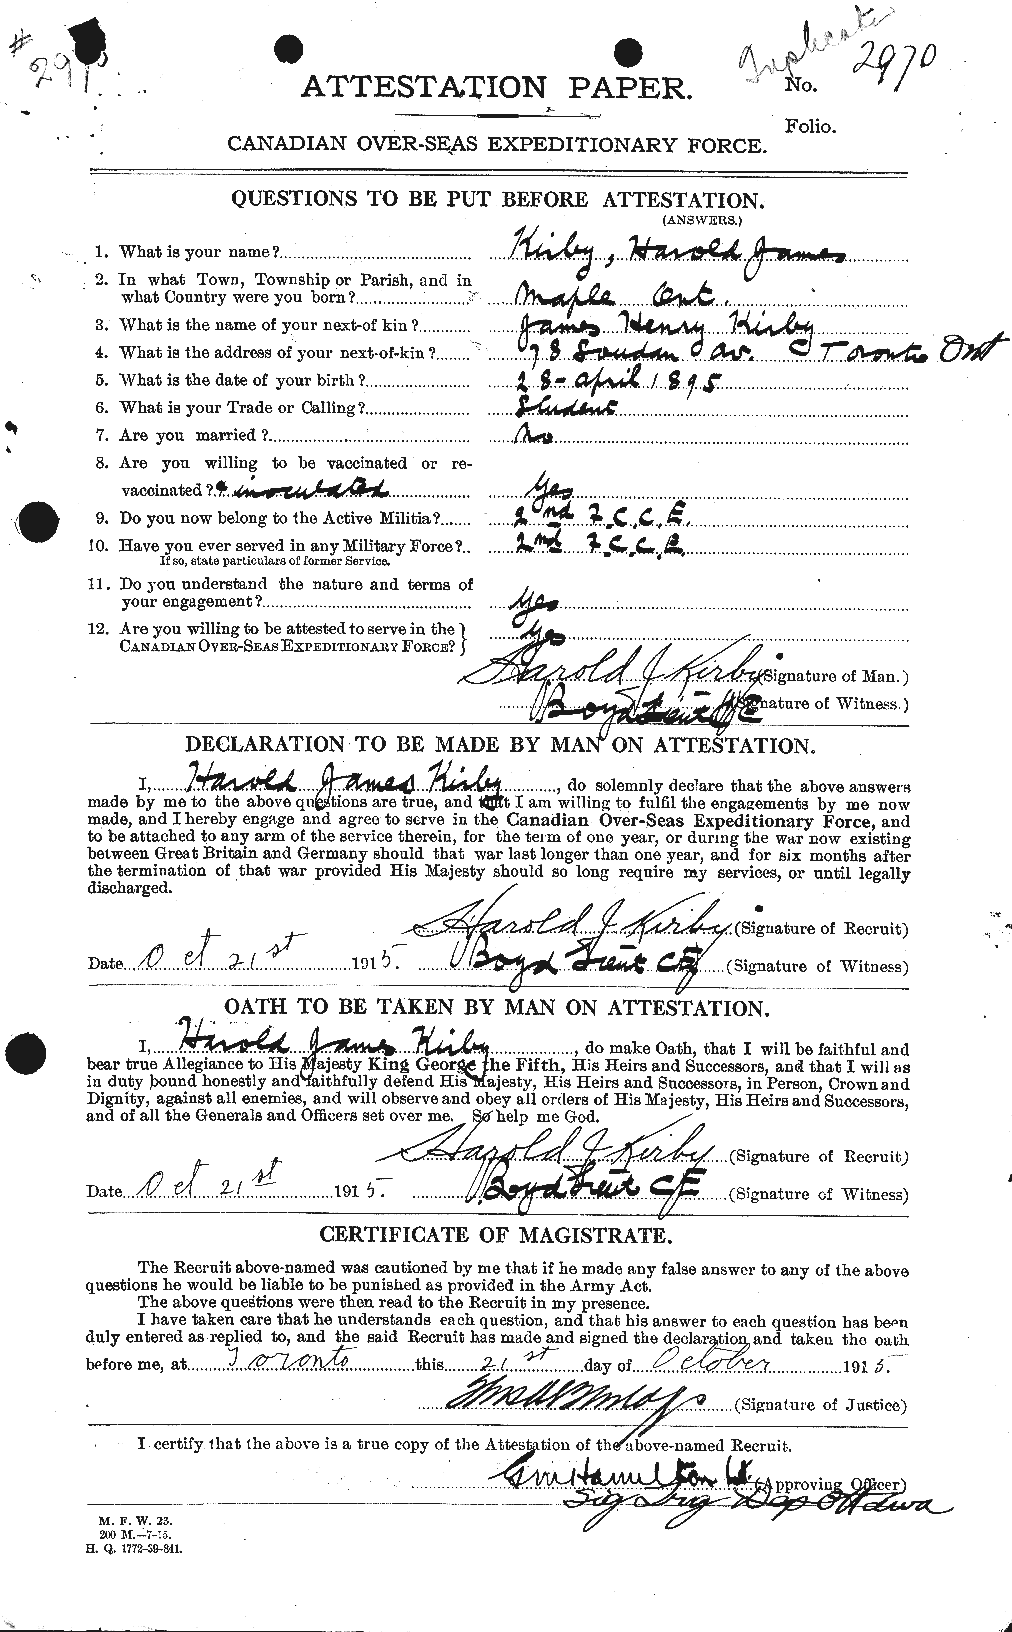 Personnel Records of the First World War - CEF 437206a